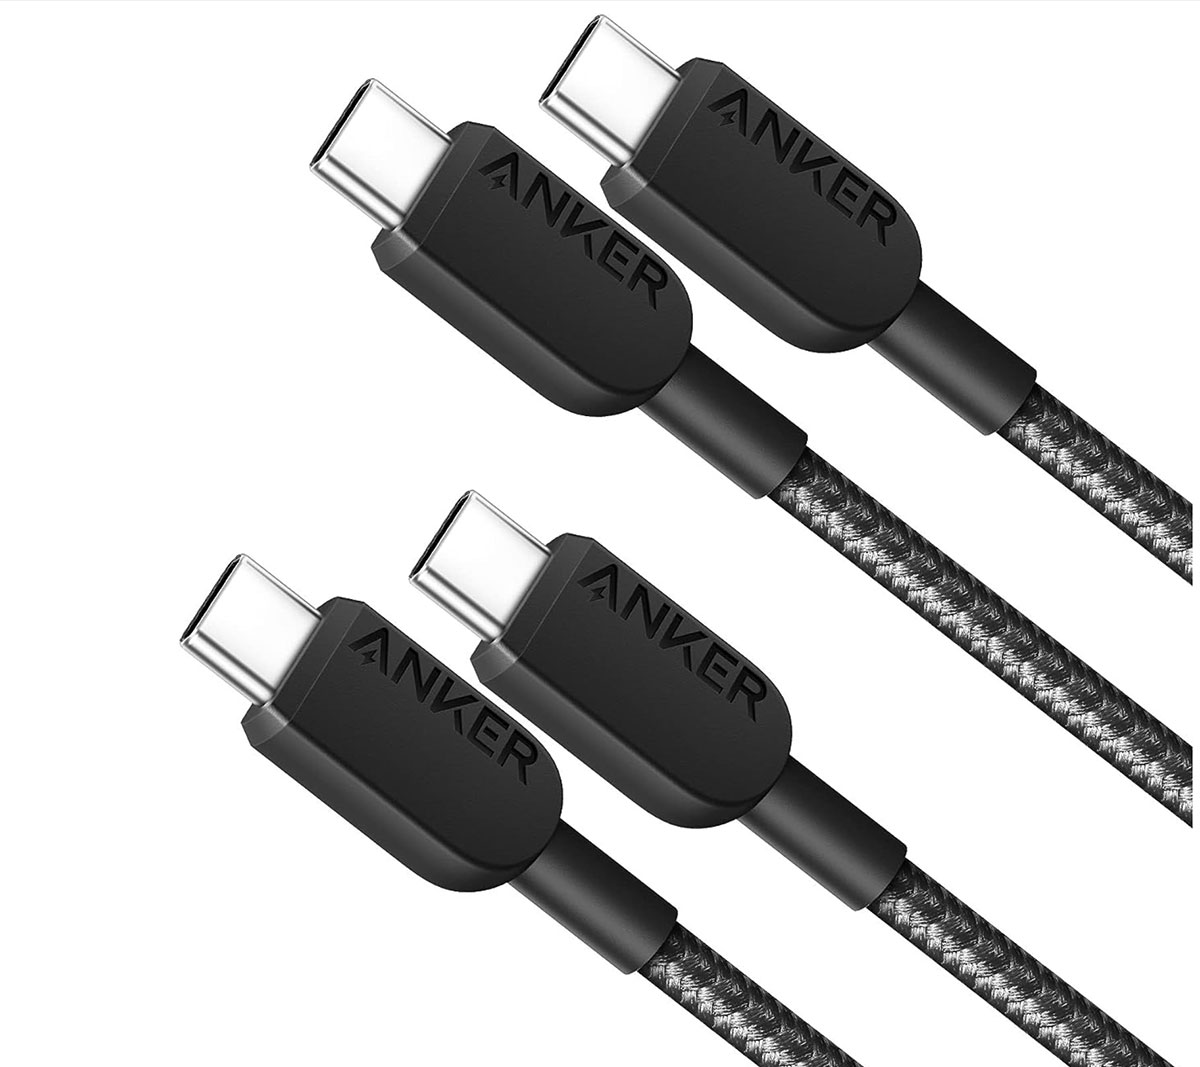 Anker 310 USB-C to USB-C Cable – Best budget USB-C charging cable for iPad